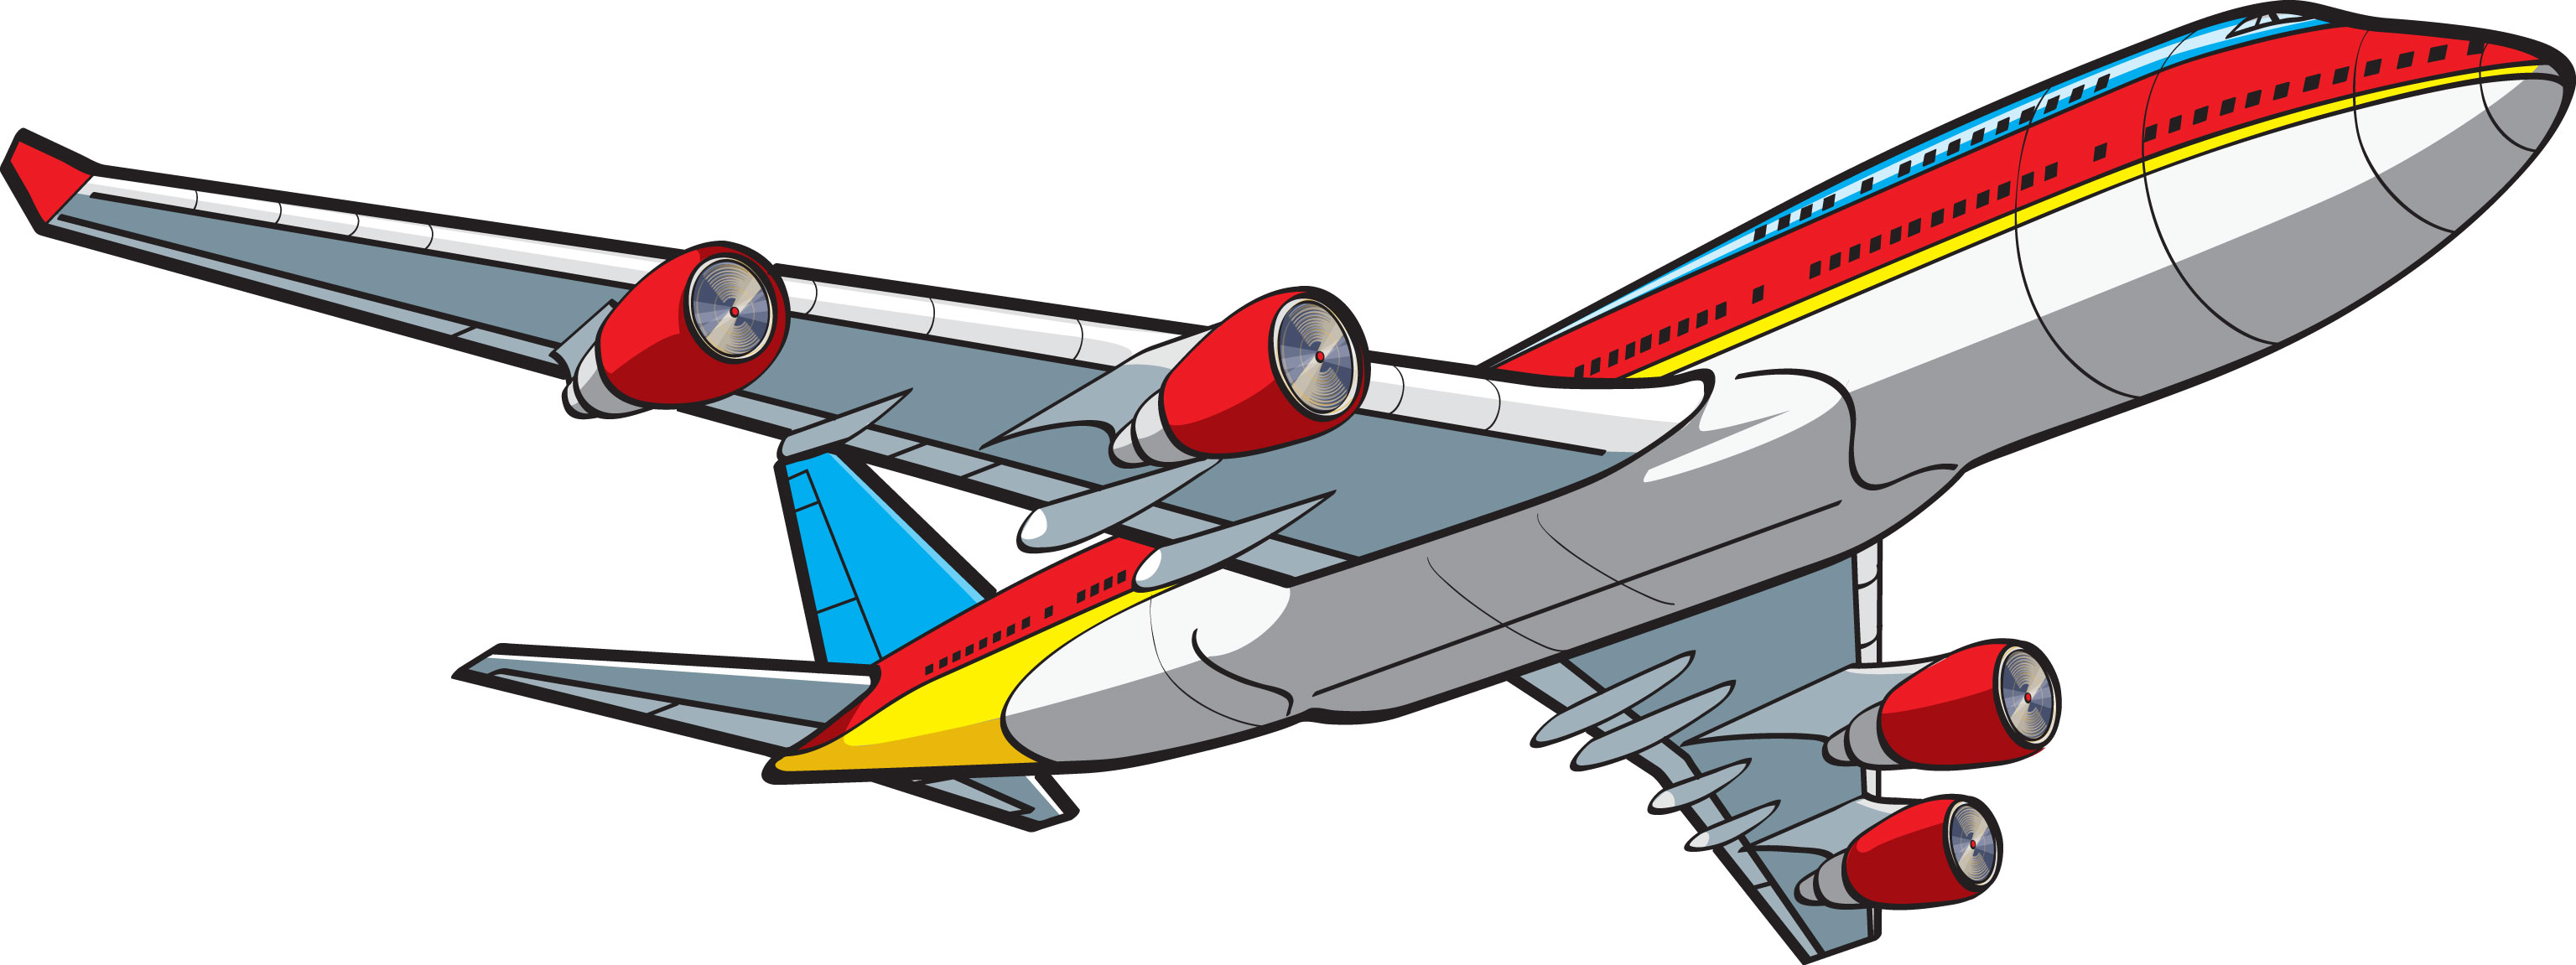 Free Cartoon Airplane Clipart, Download Free Clip Art, Free.